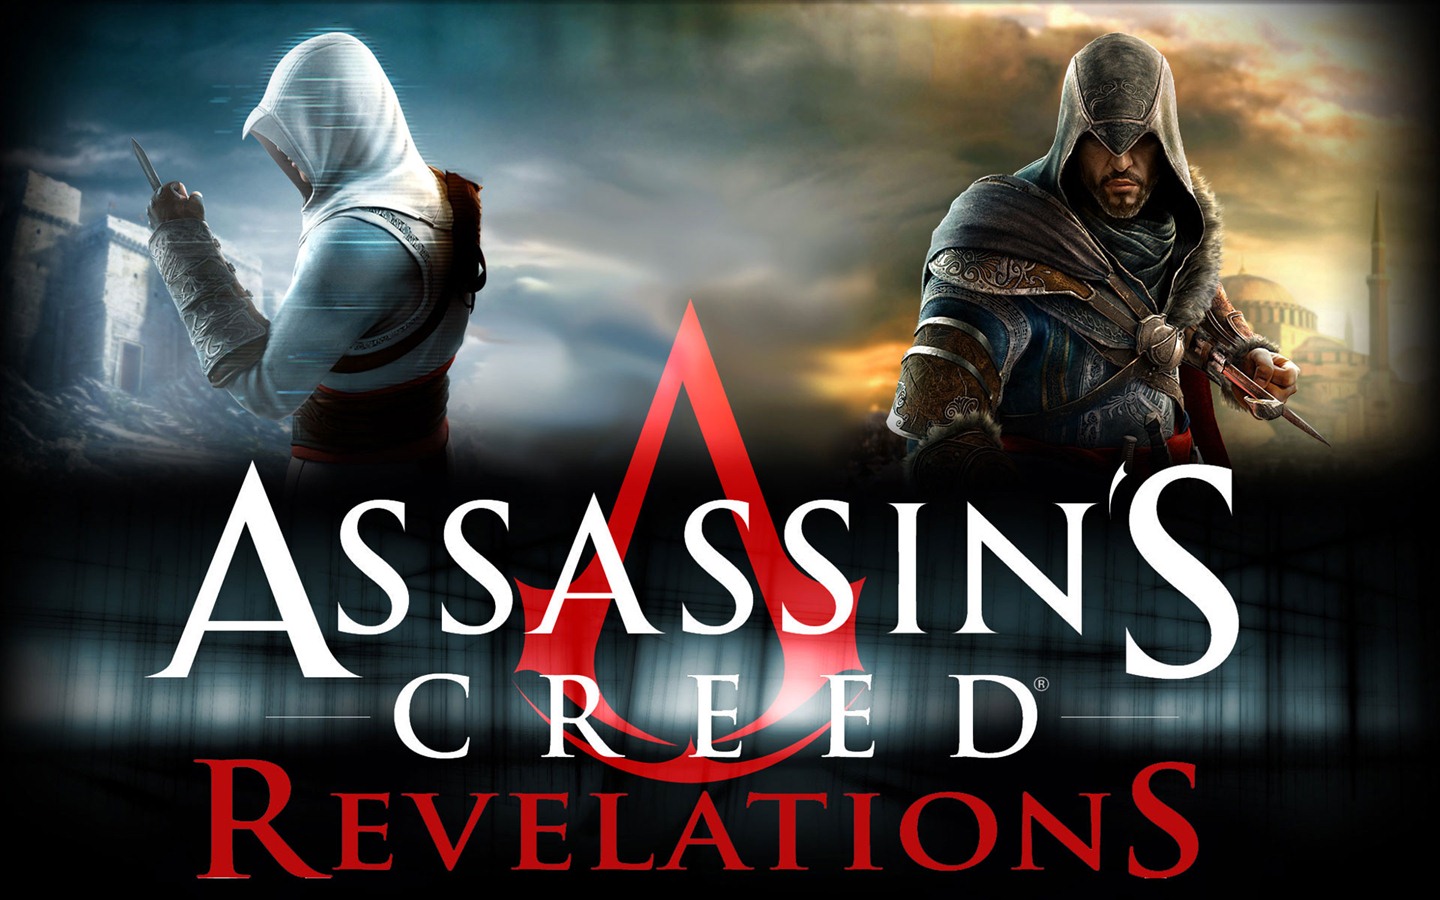 Assassin's Creed: Revelations HD wallpapers #1 - 1440x900